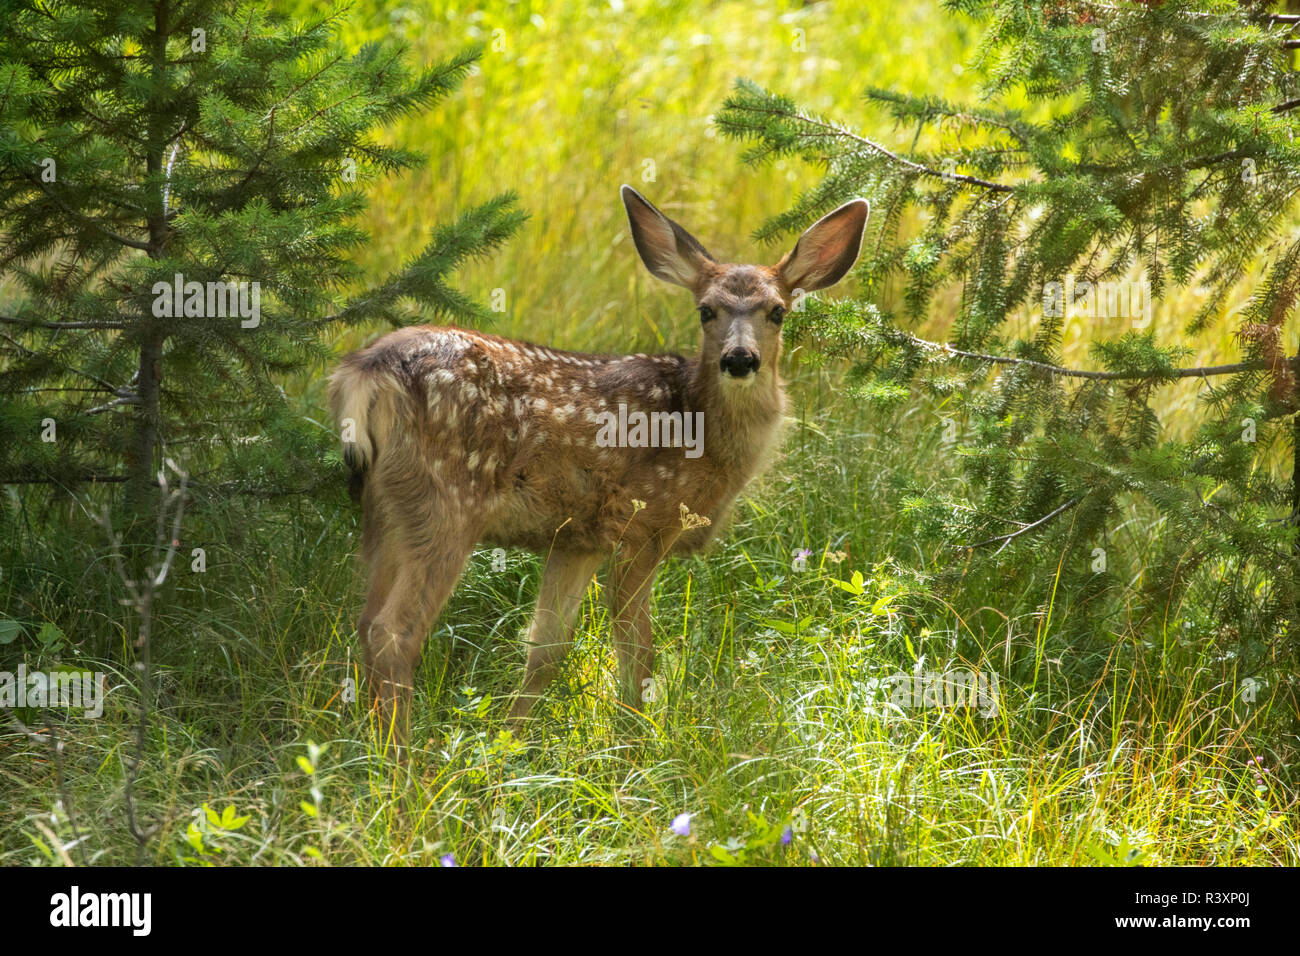 USA, Colorado, Pike National Forest. Mule deer fawn. Stock Photo